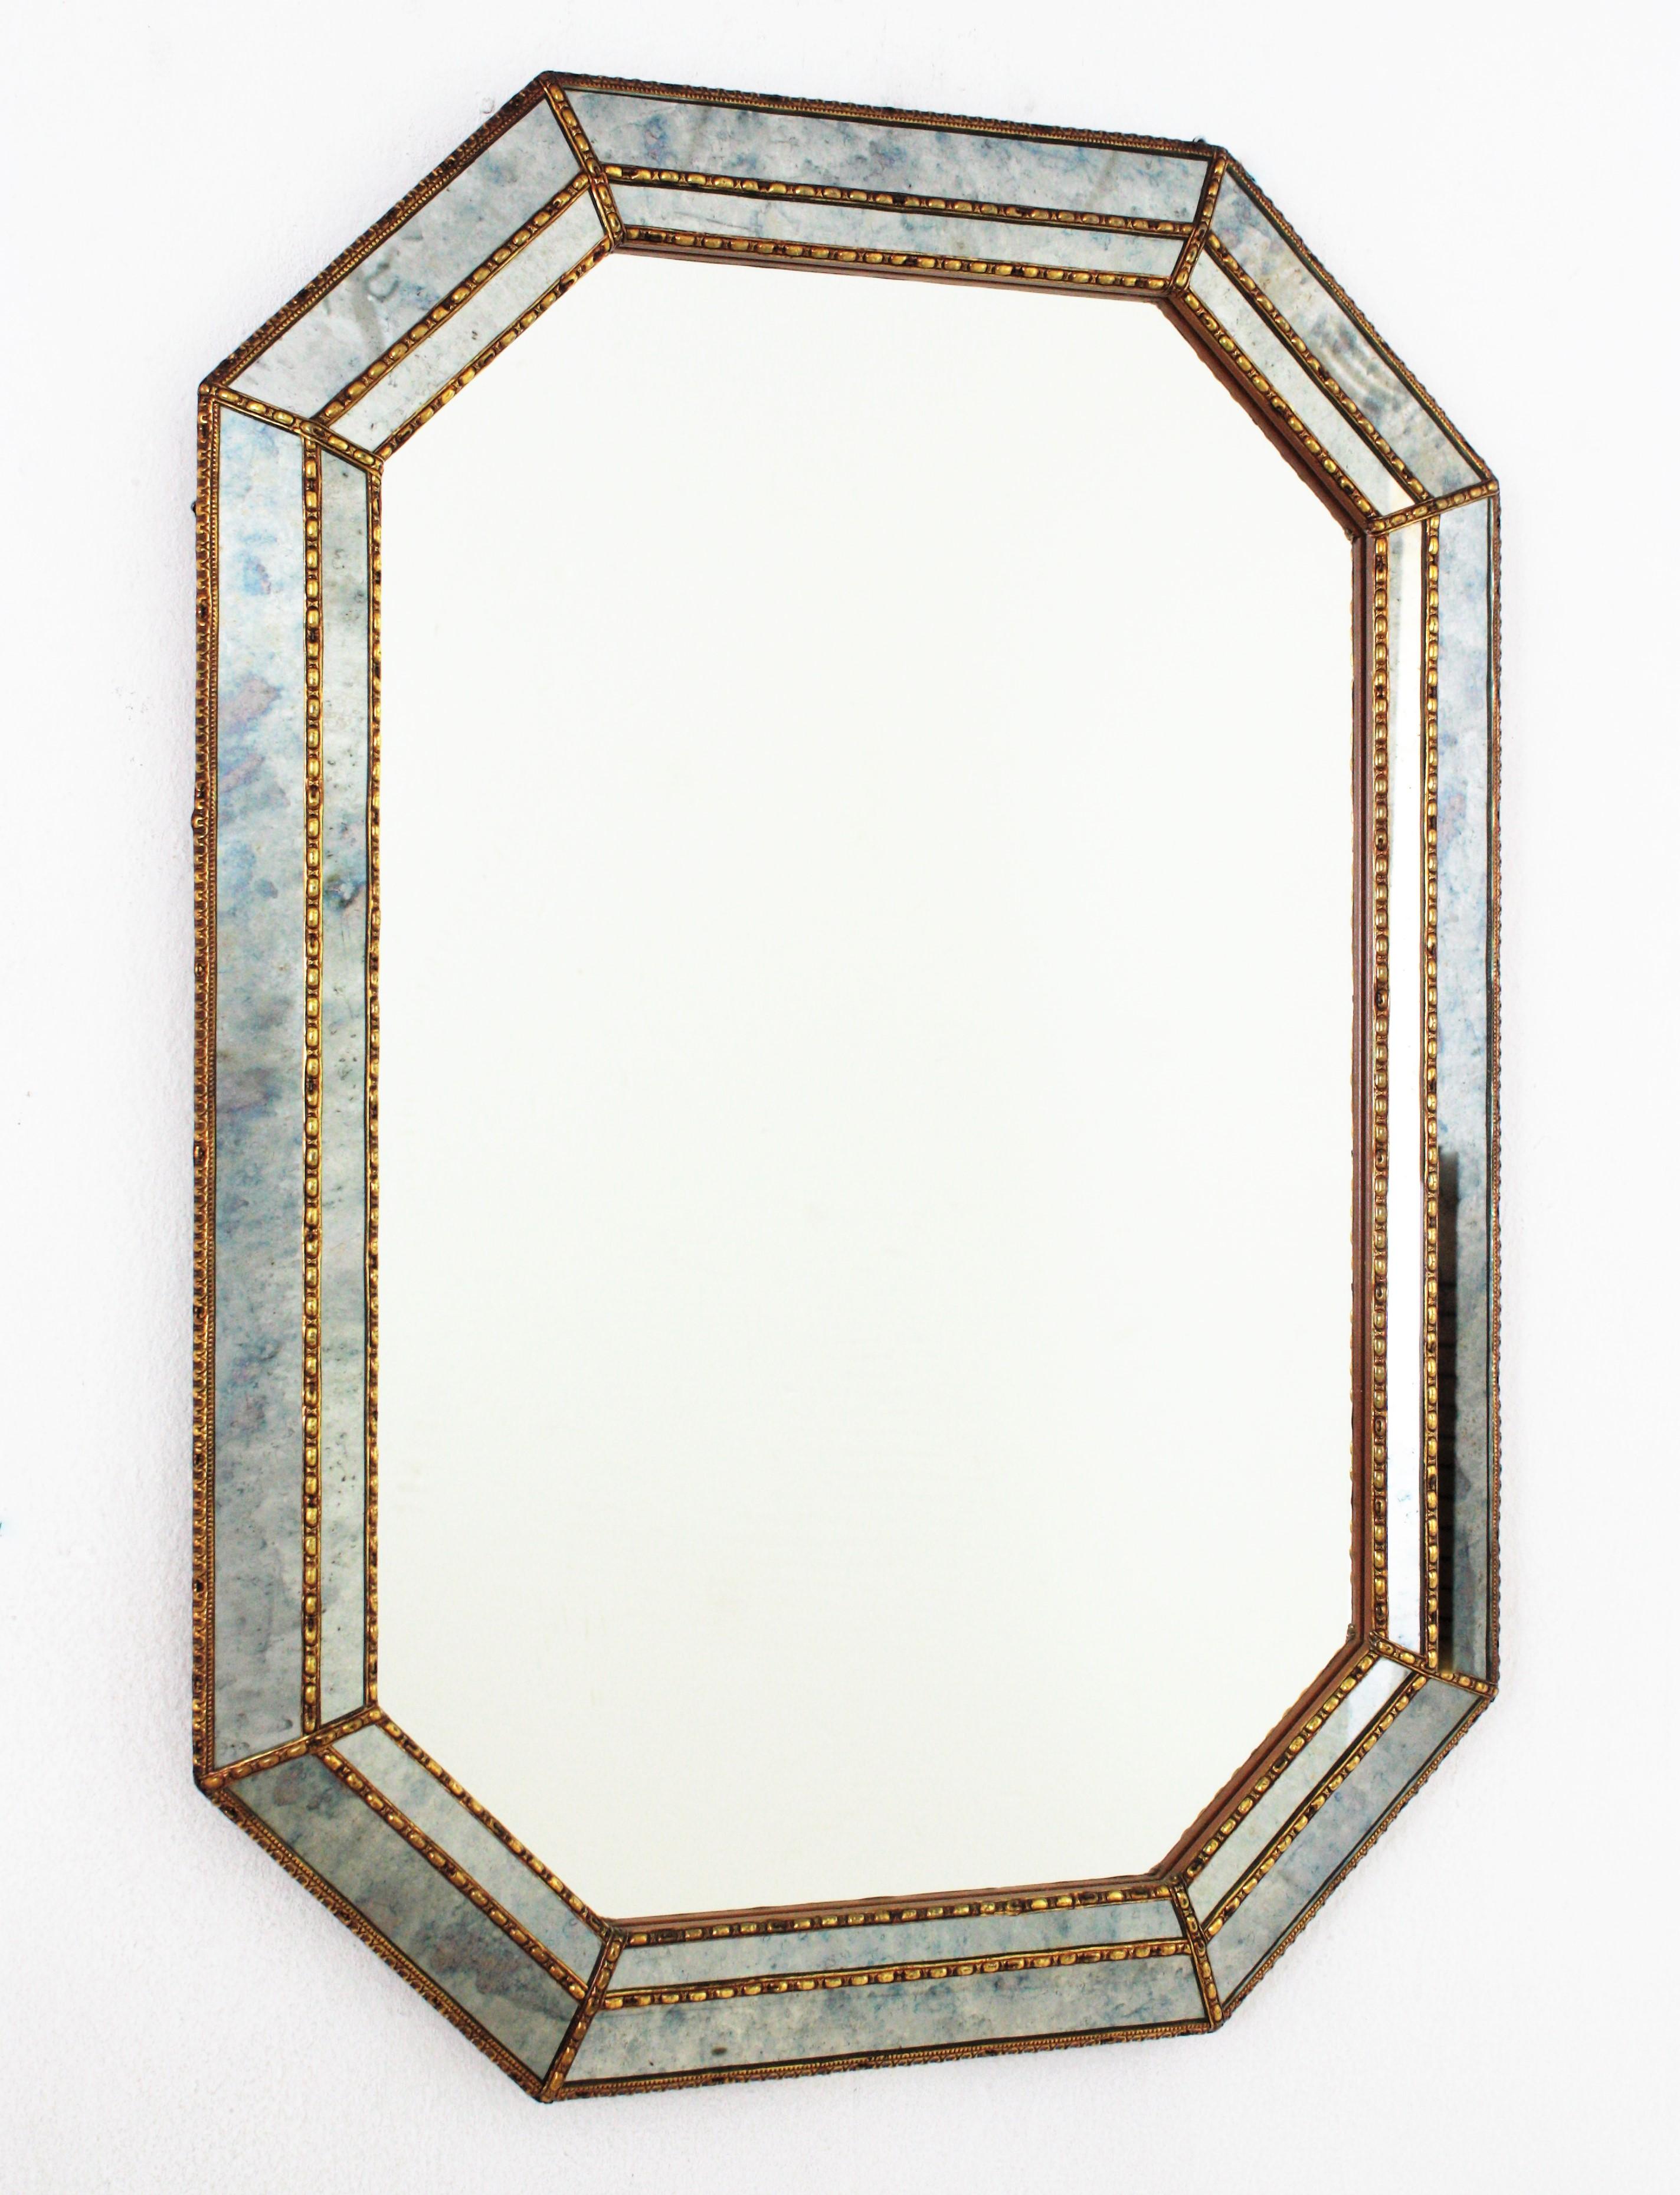 Cool Venetian Modern octagonal mirror with iridiscent mirror glass panels. Spain, 1960s
This glamorous mirror featuring a double layered mirror frame made of brass. Octagonal form with a frame that has two layers of decorative paneled mirrors. Both